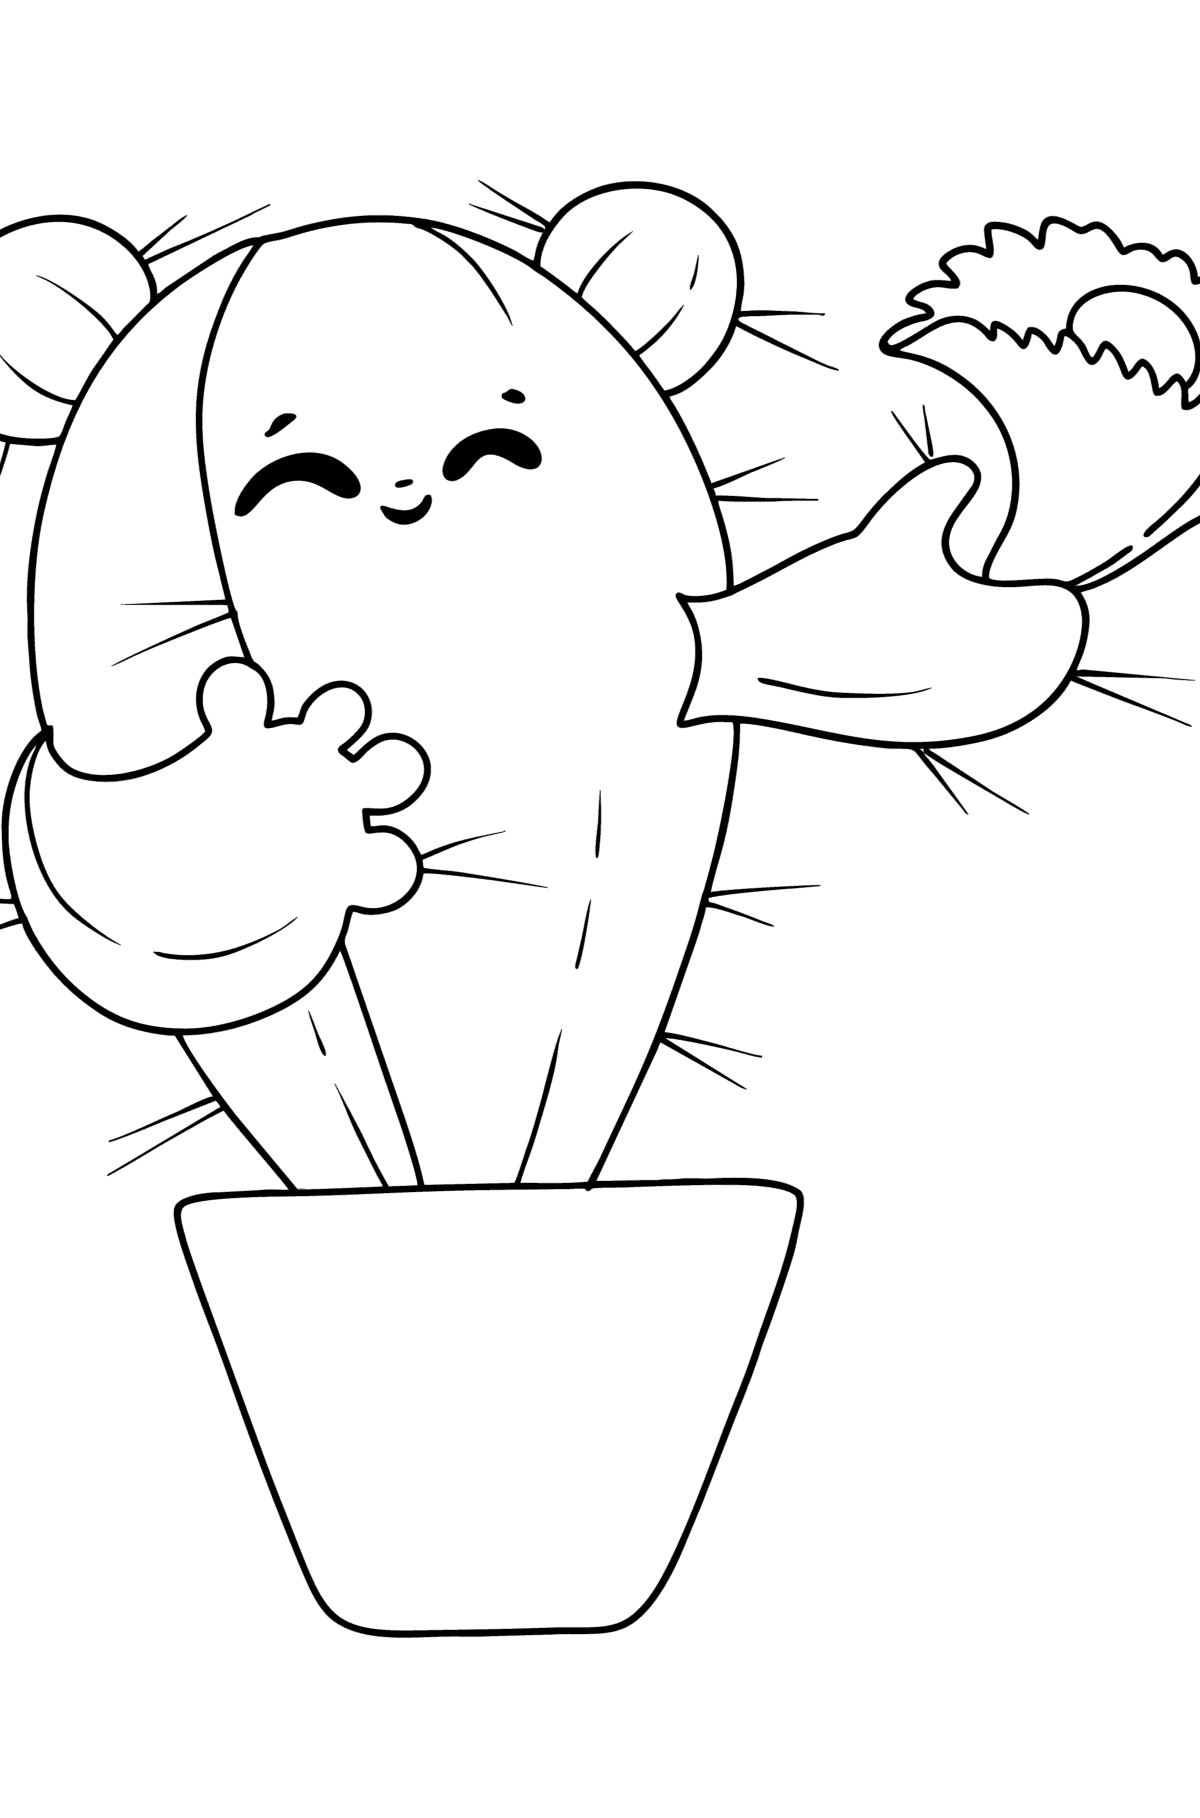 Adorable Cactus coloring page - Coloring Pages for Kids